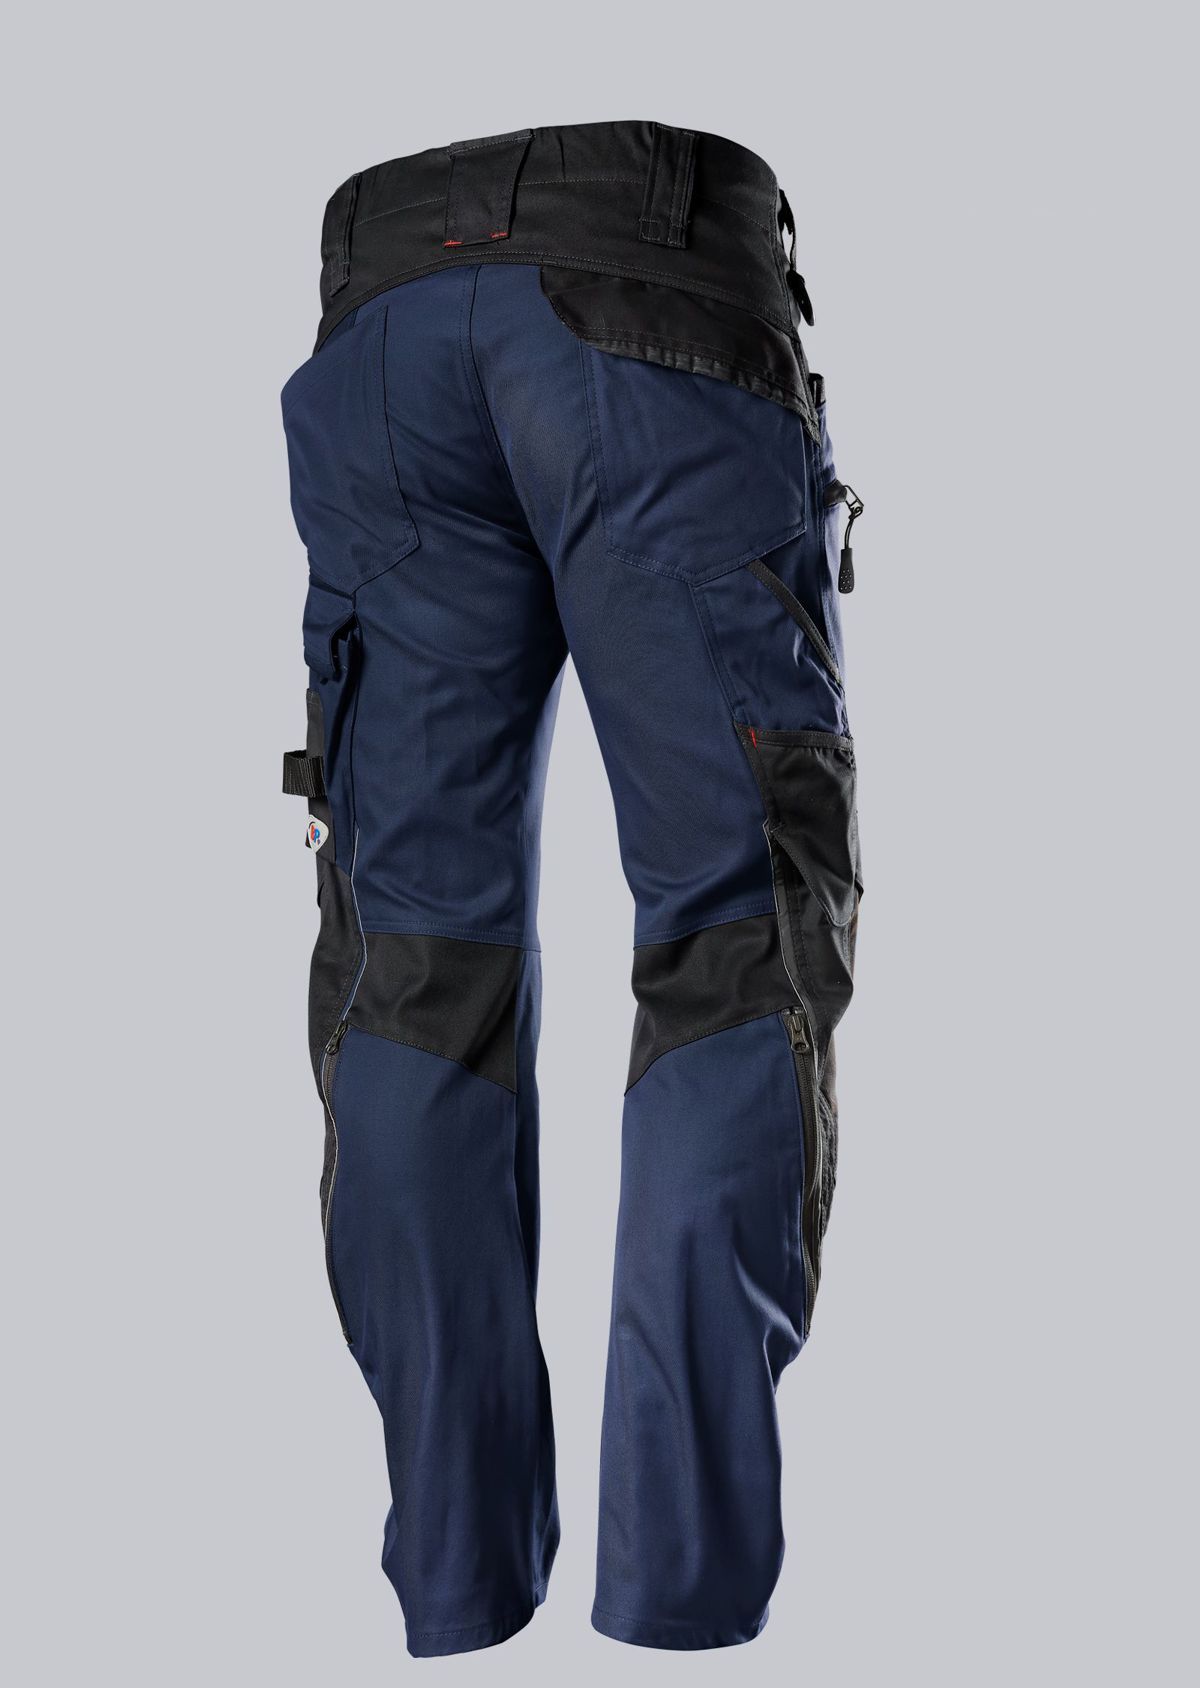 BP® Stretch work trousers with knee pad pockets